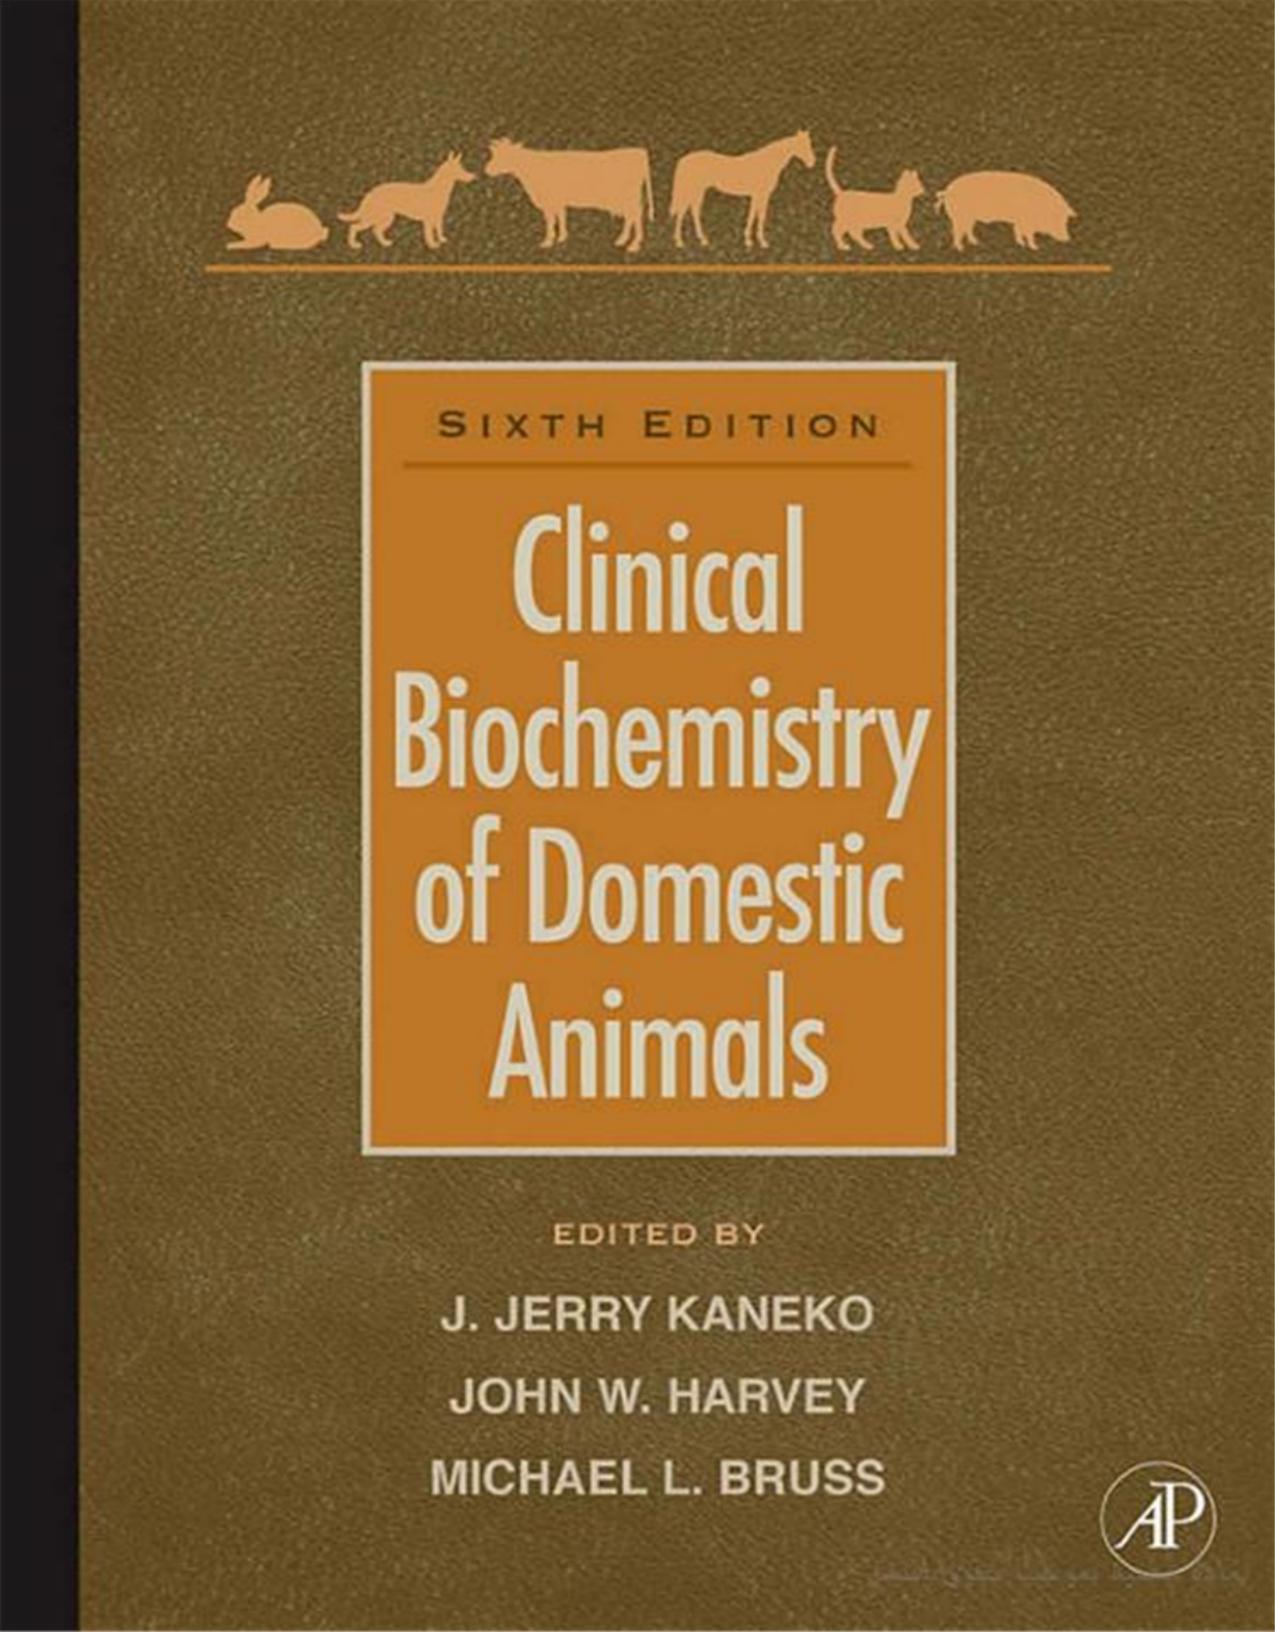 Clinical Biochemistry of Domestic Animals, 6th Edition 2008